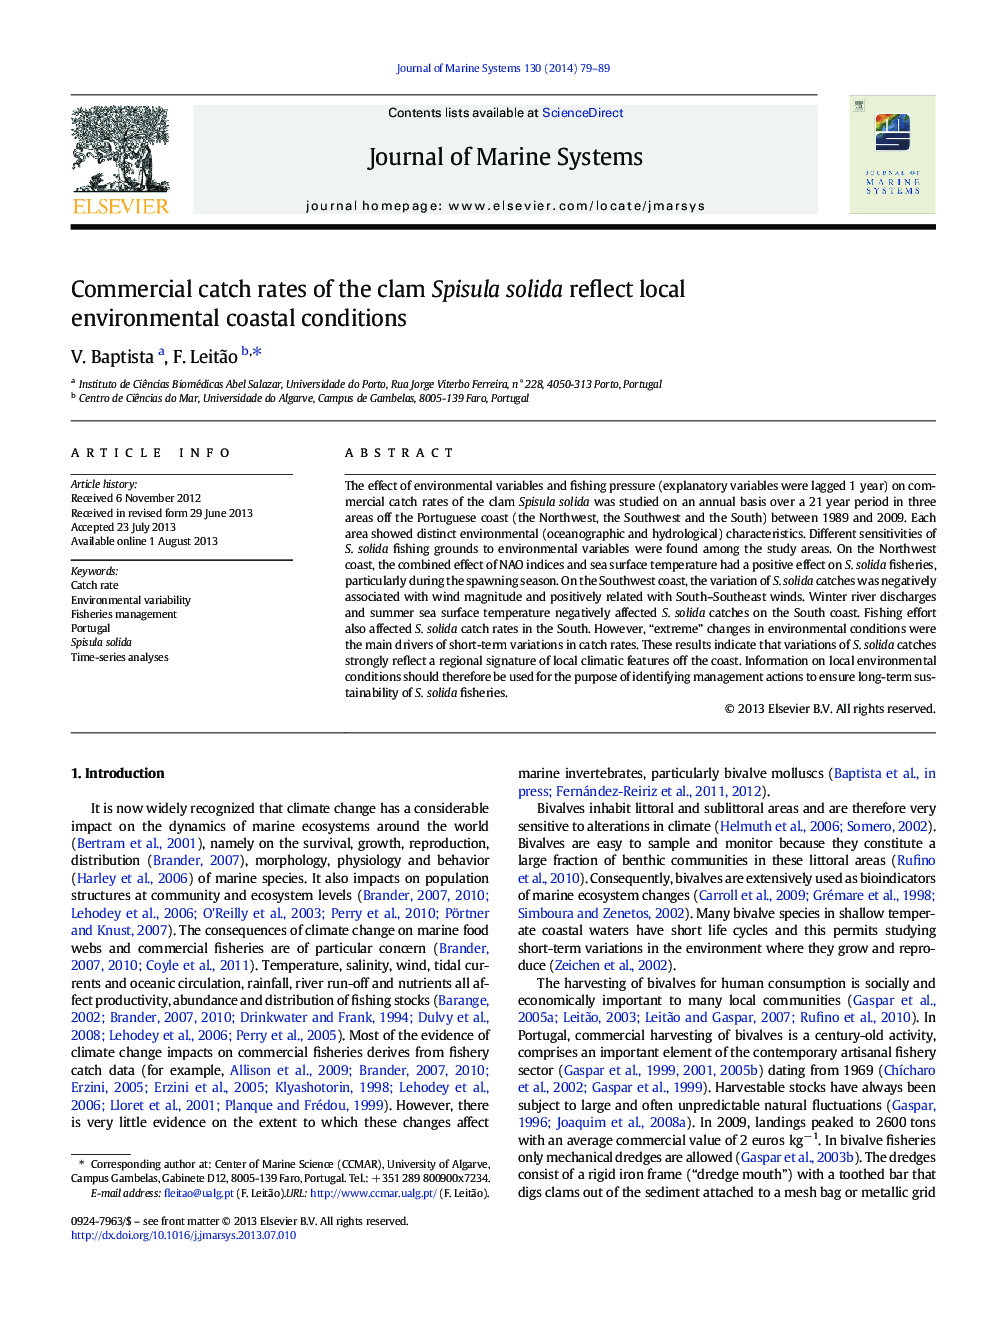 Commercial catch rates of the clam Spisula solida reflect local environmental coastal conditions